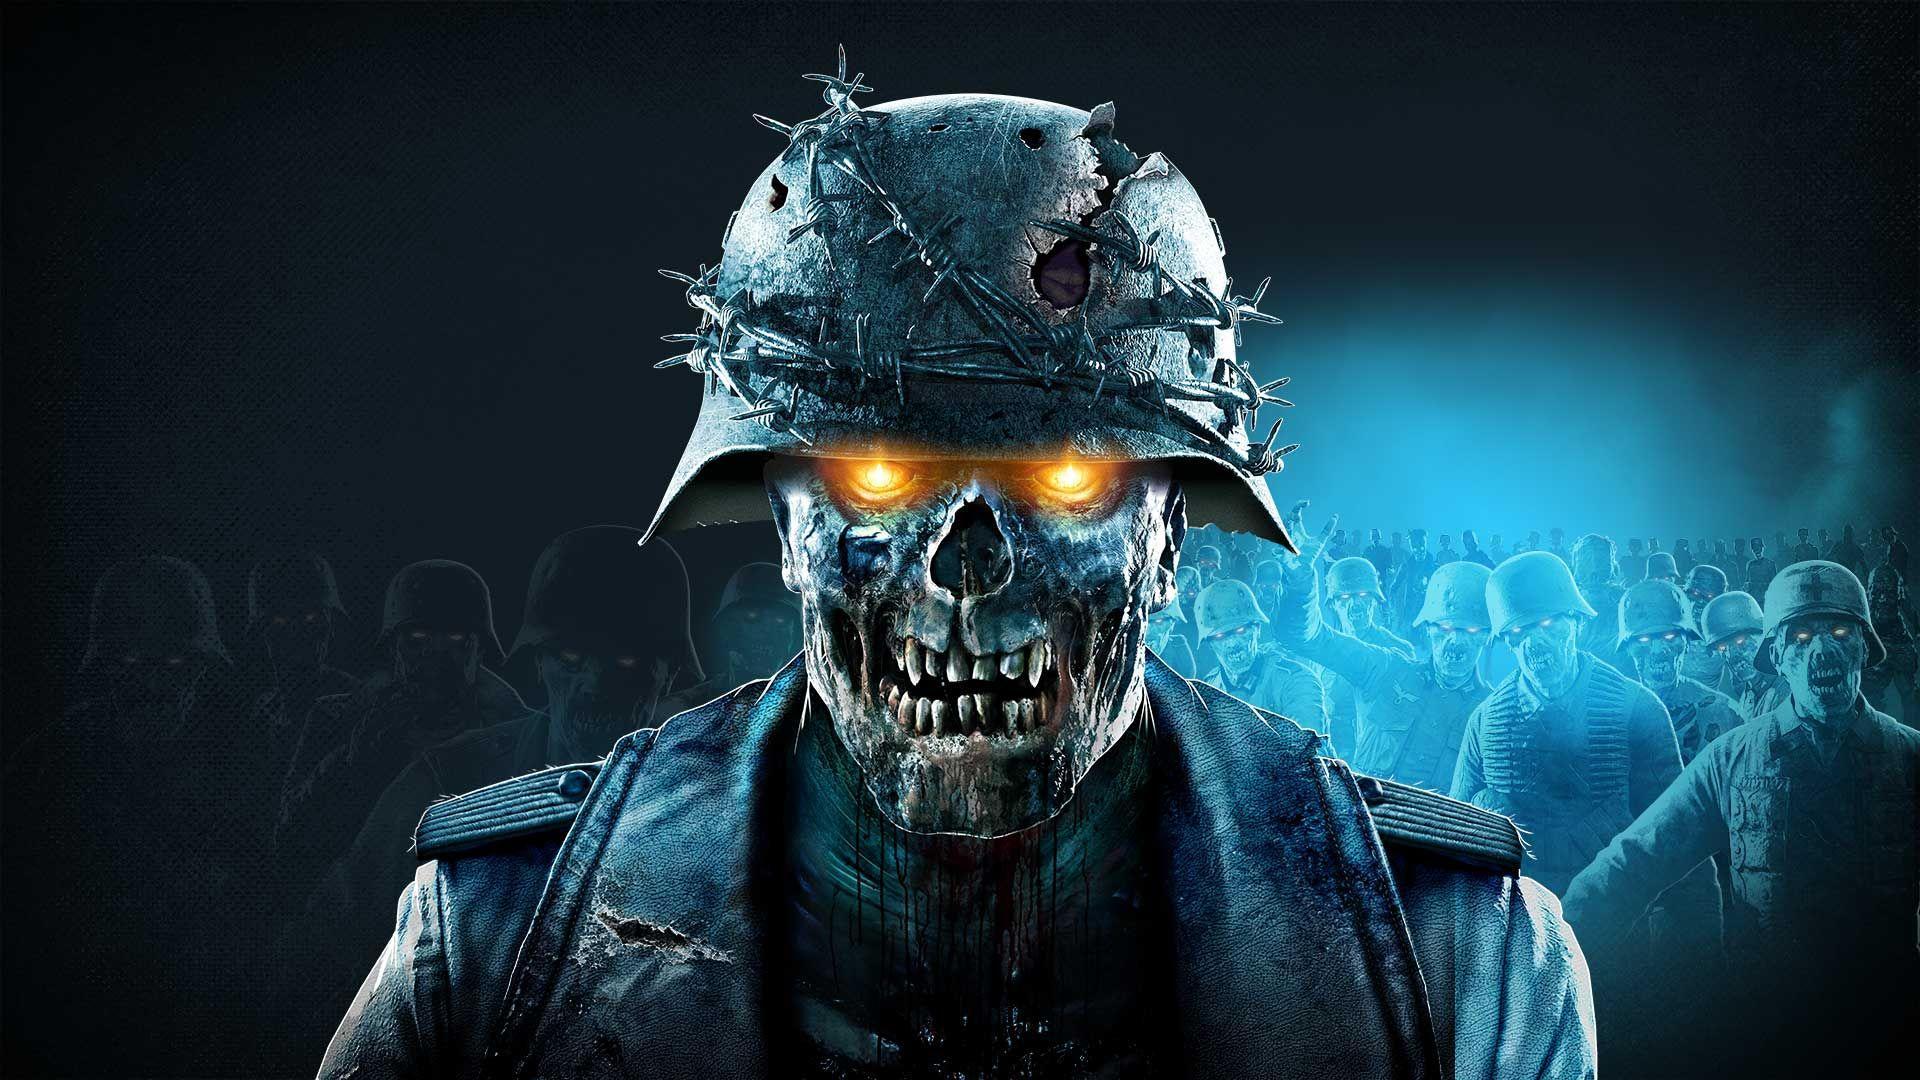 cool zombies and soldiers wallpaper